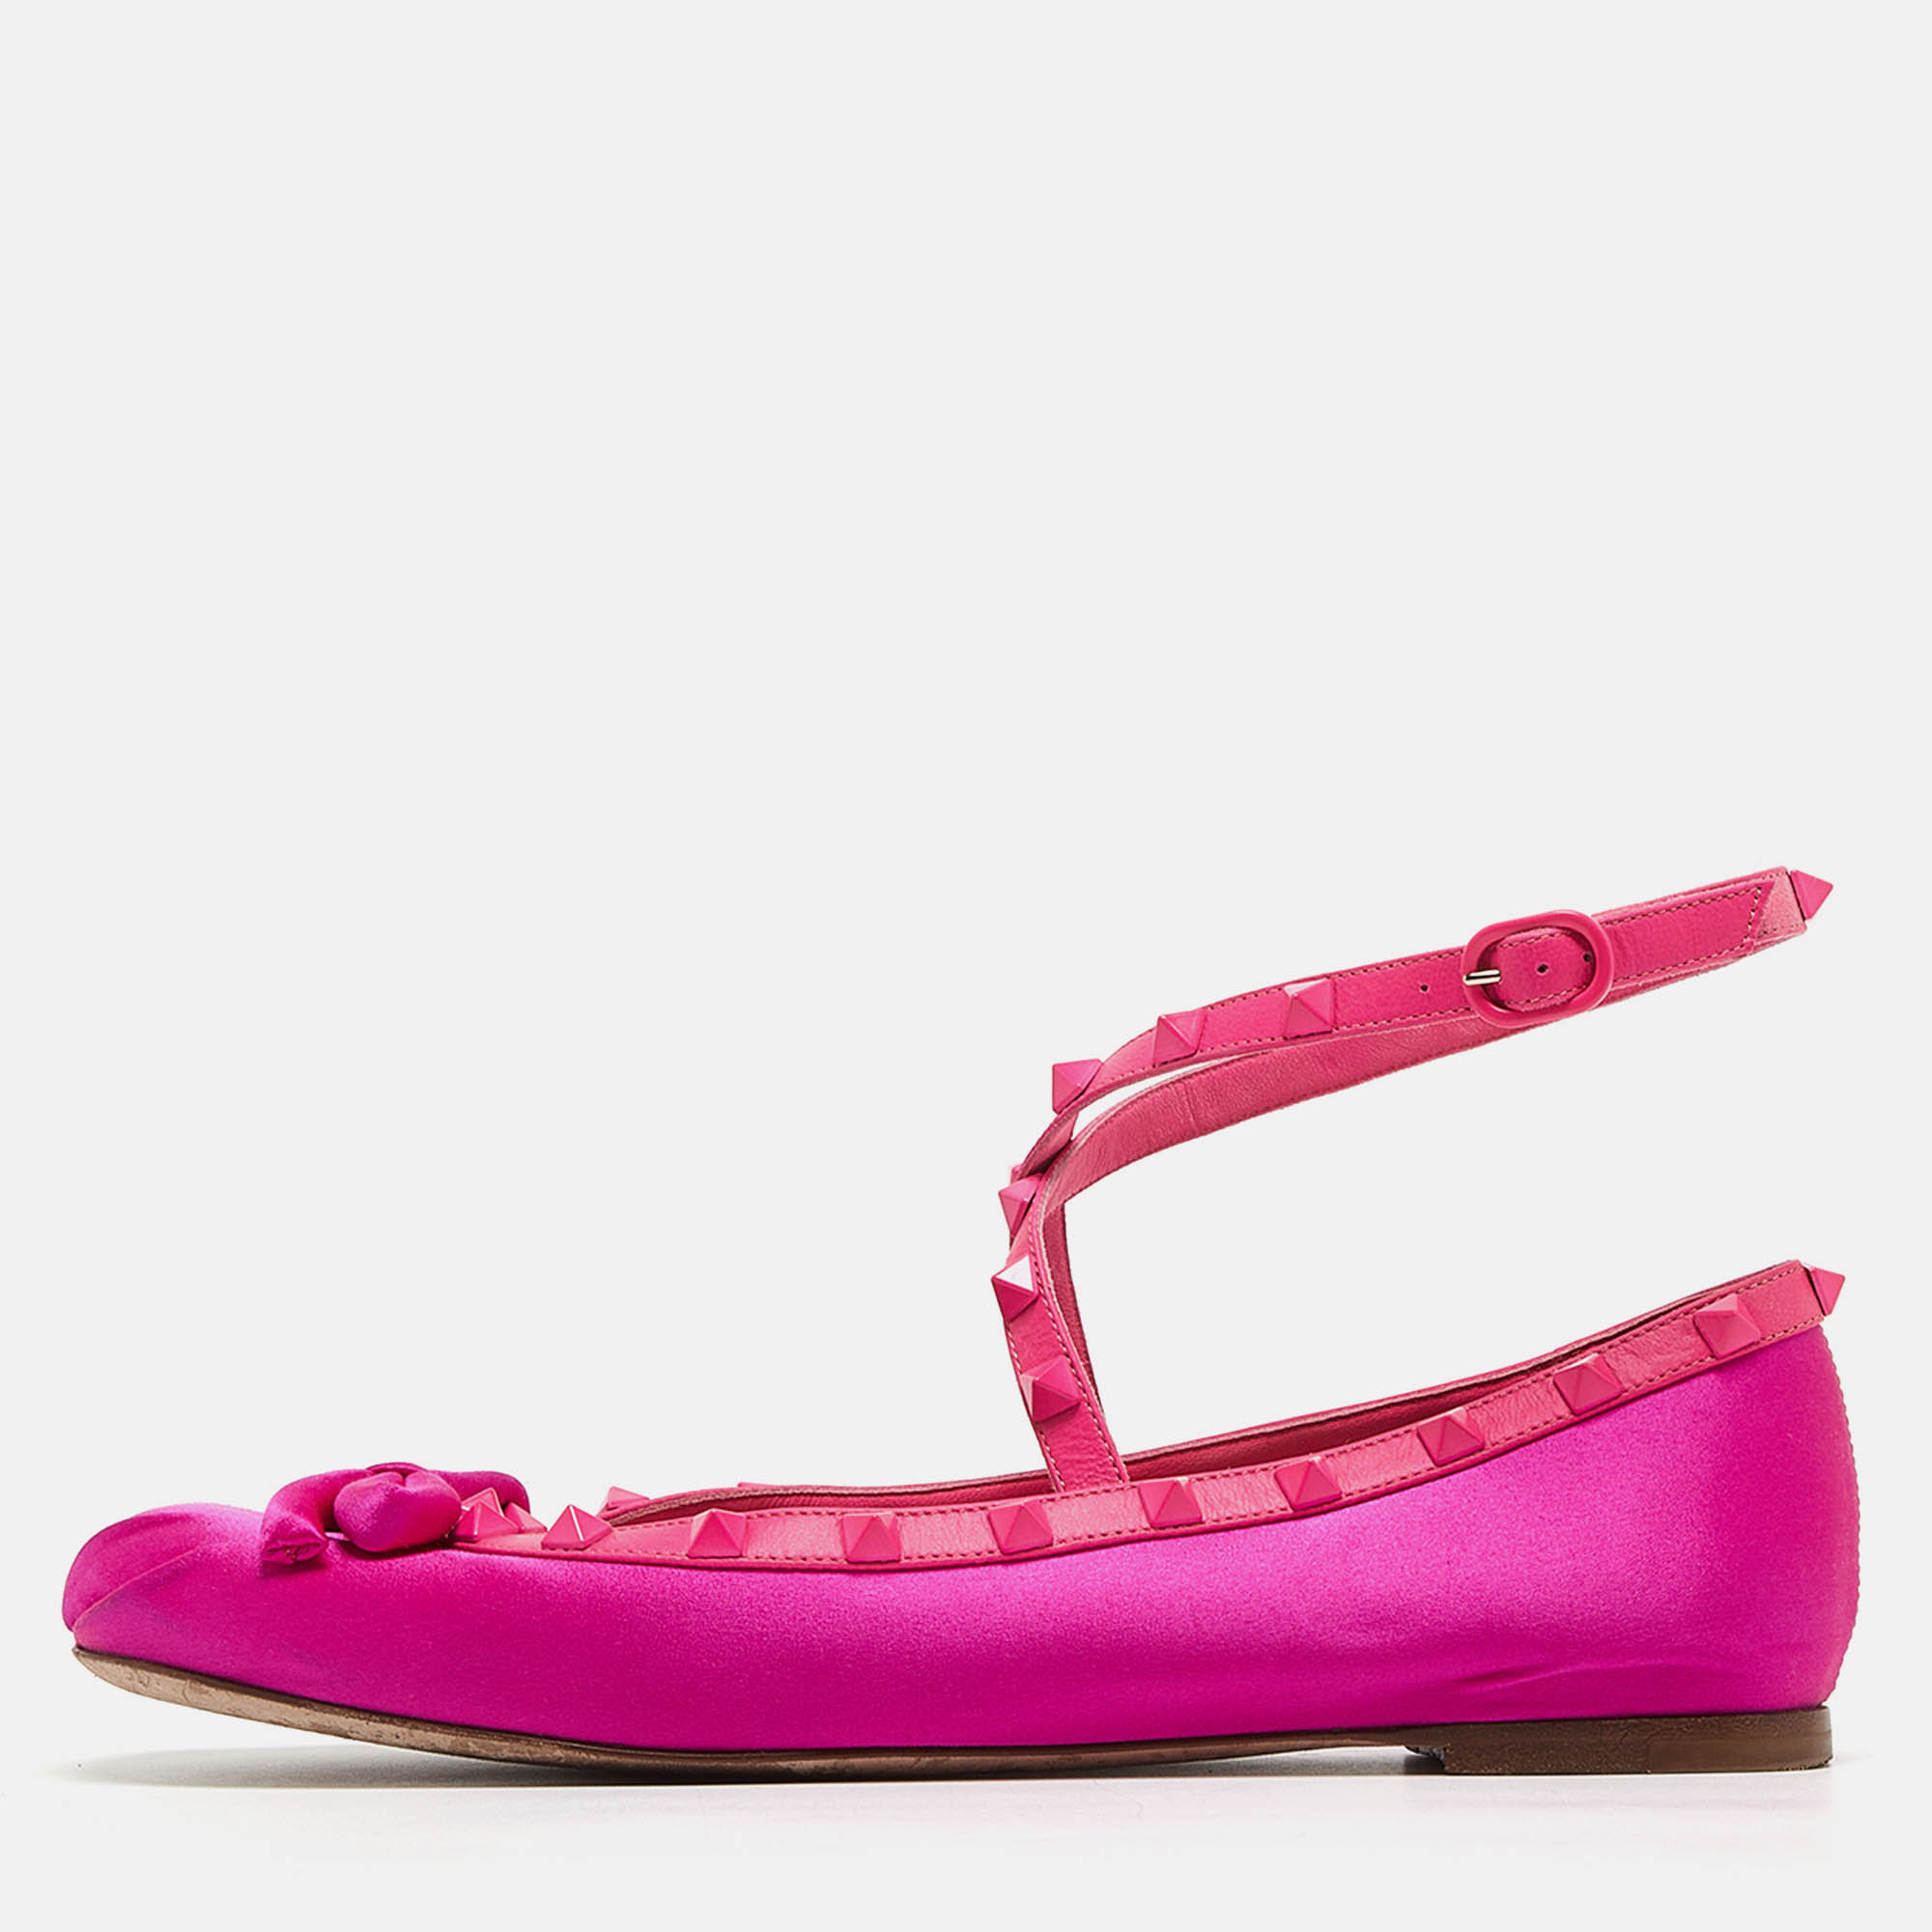 Valentino pink satin and leather rockstud ankle strap ballet flats size 39.5